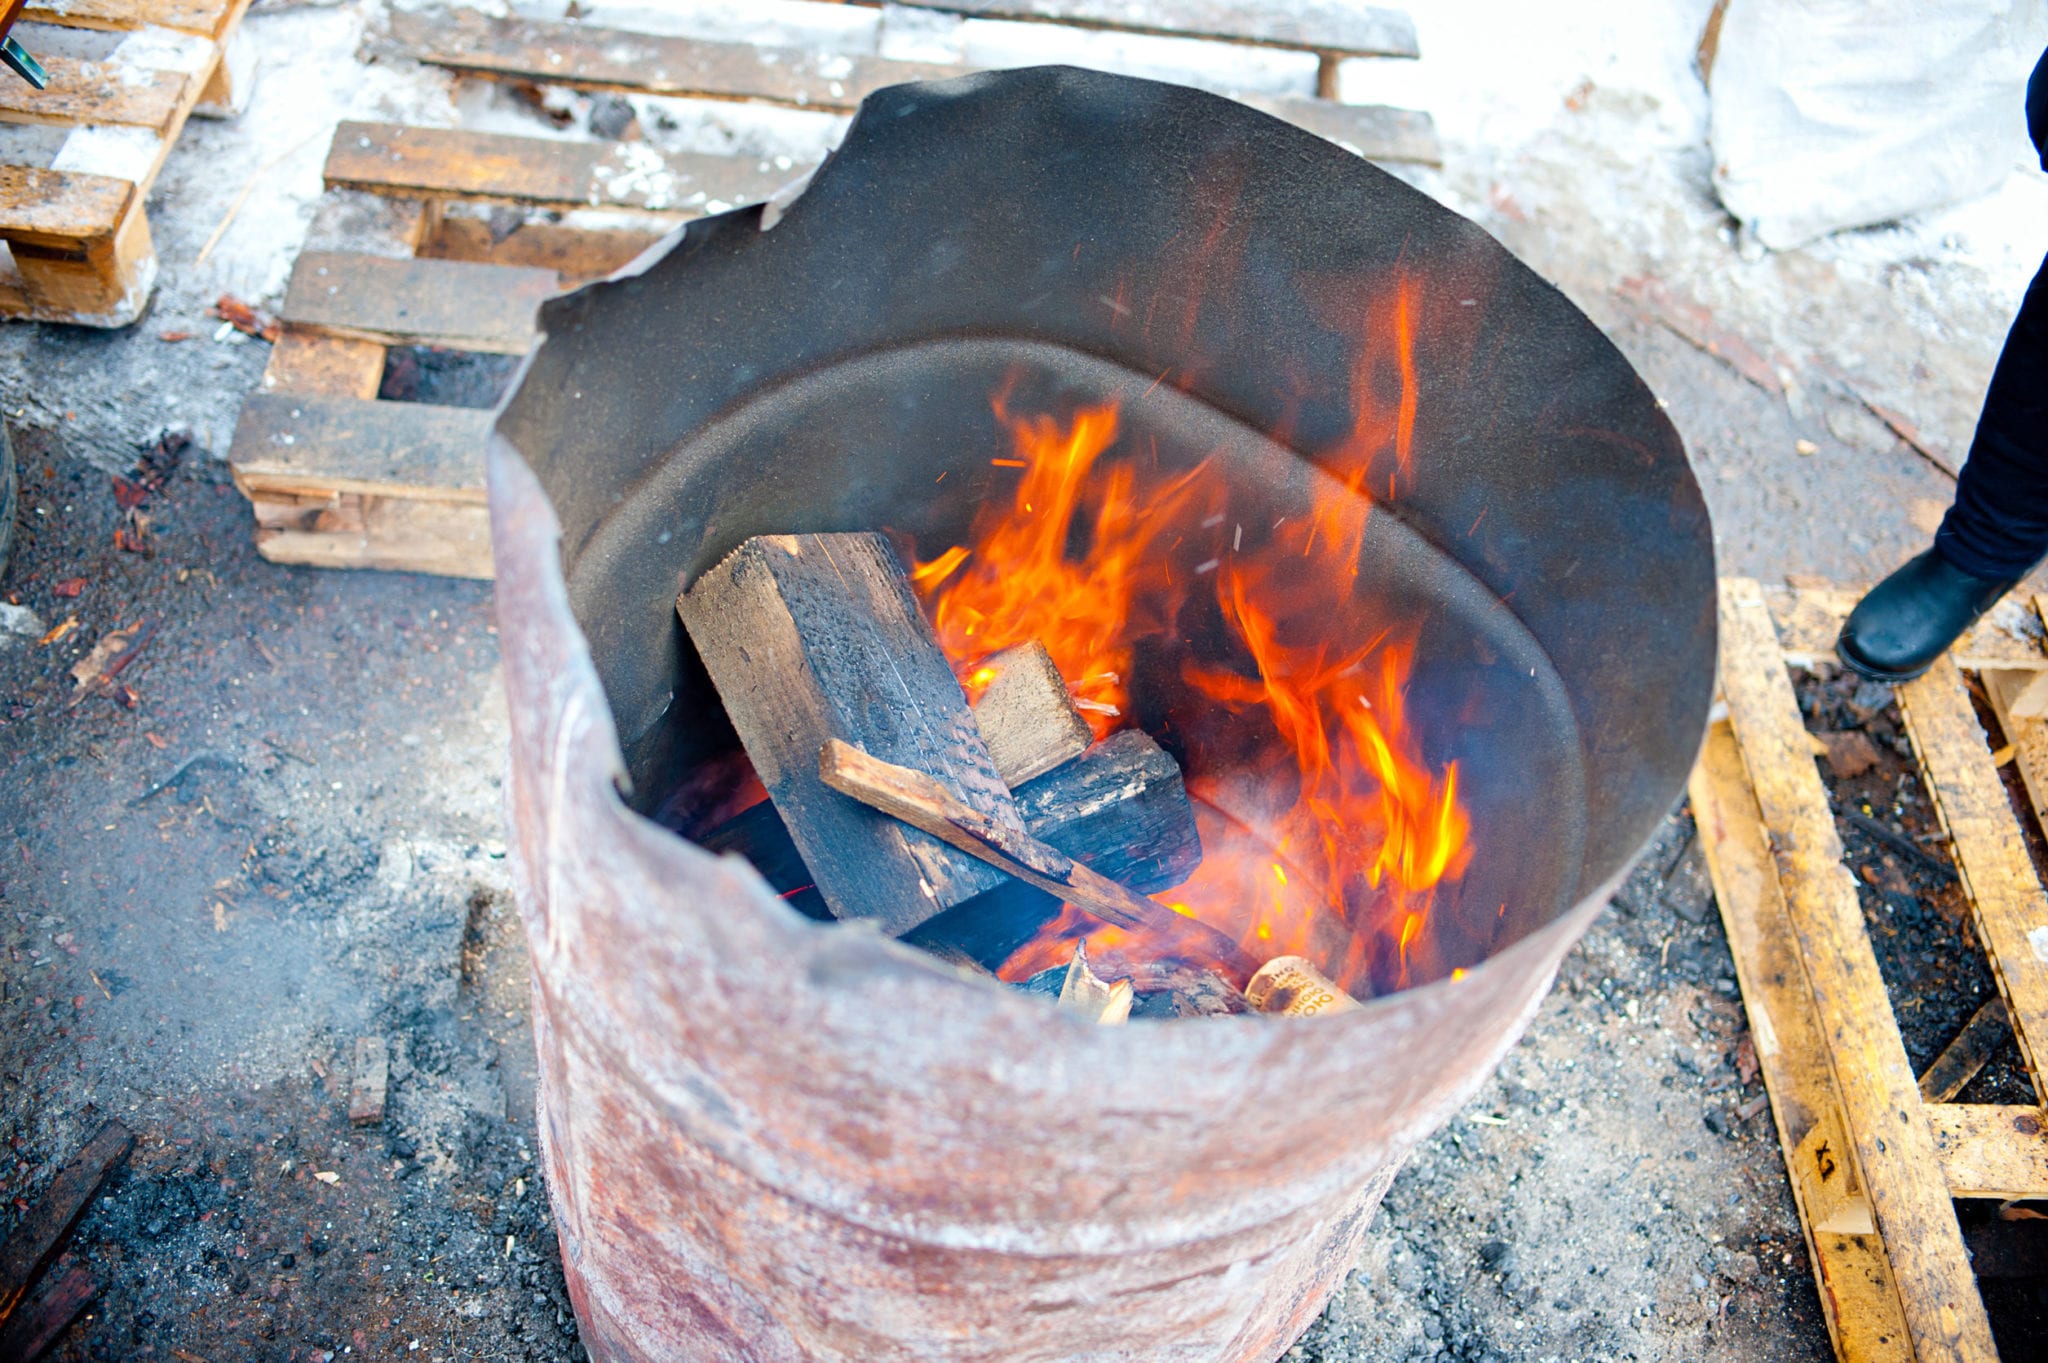 Bad Break-up? Think Twice About Burning an Ex’s Old Things in MN